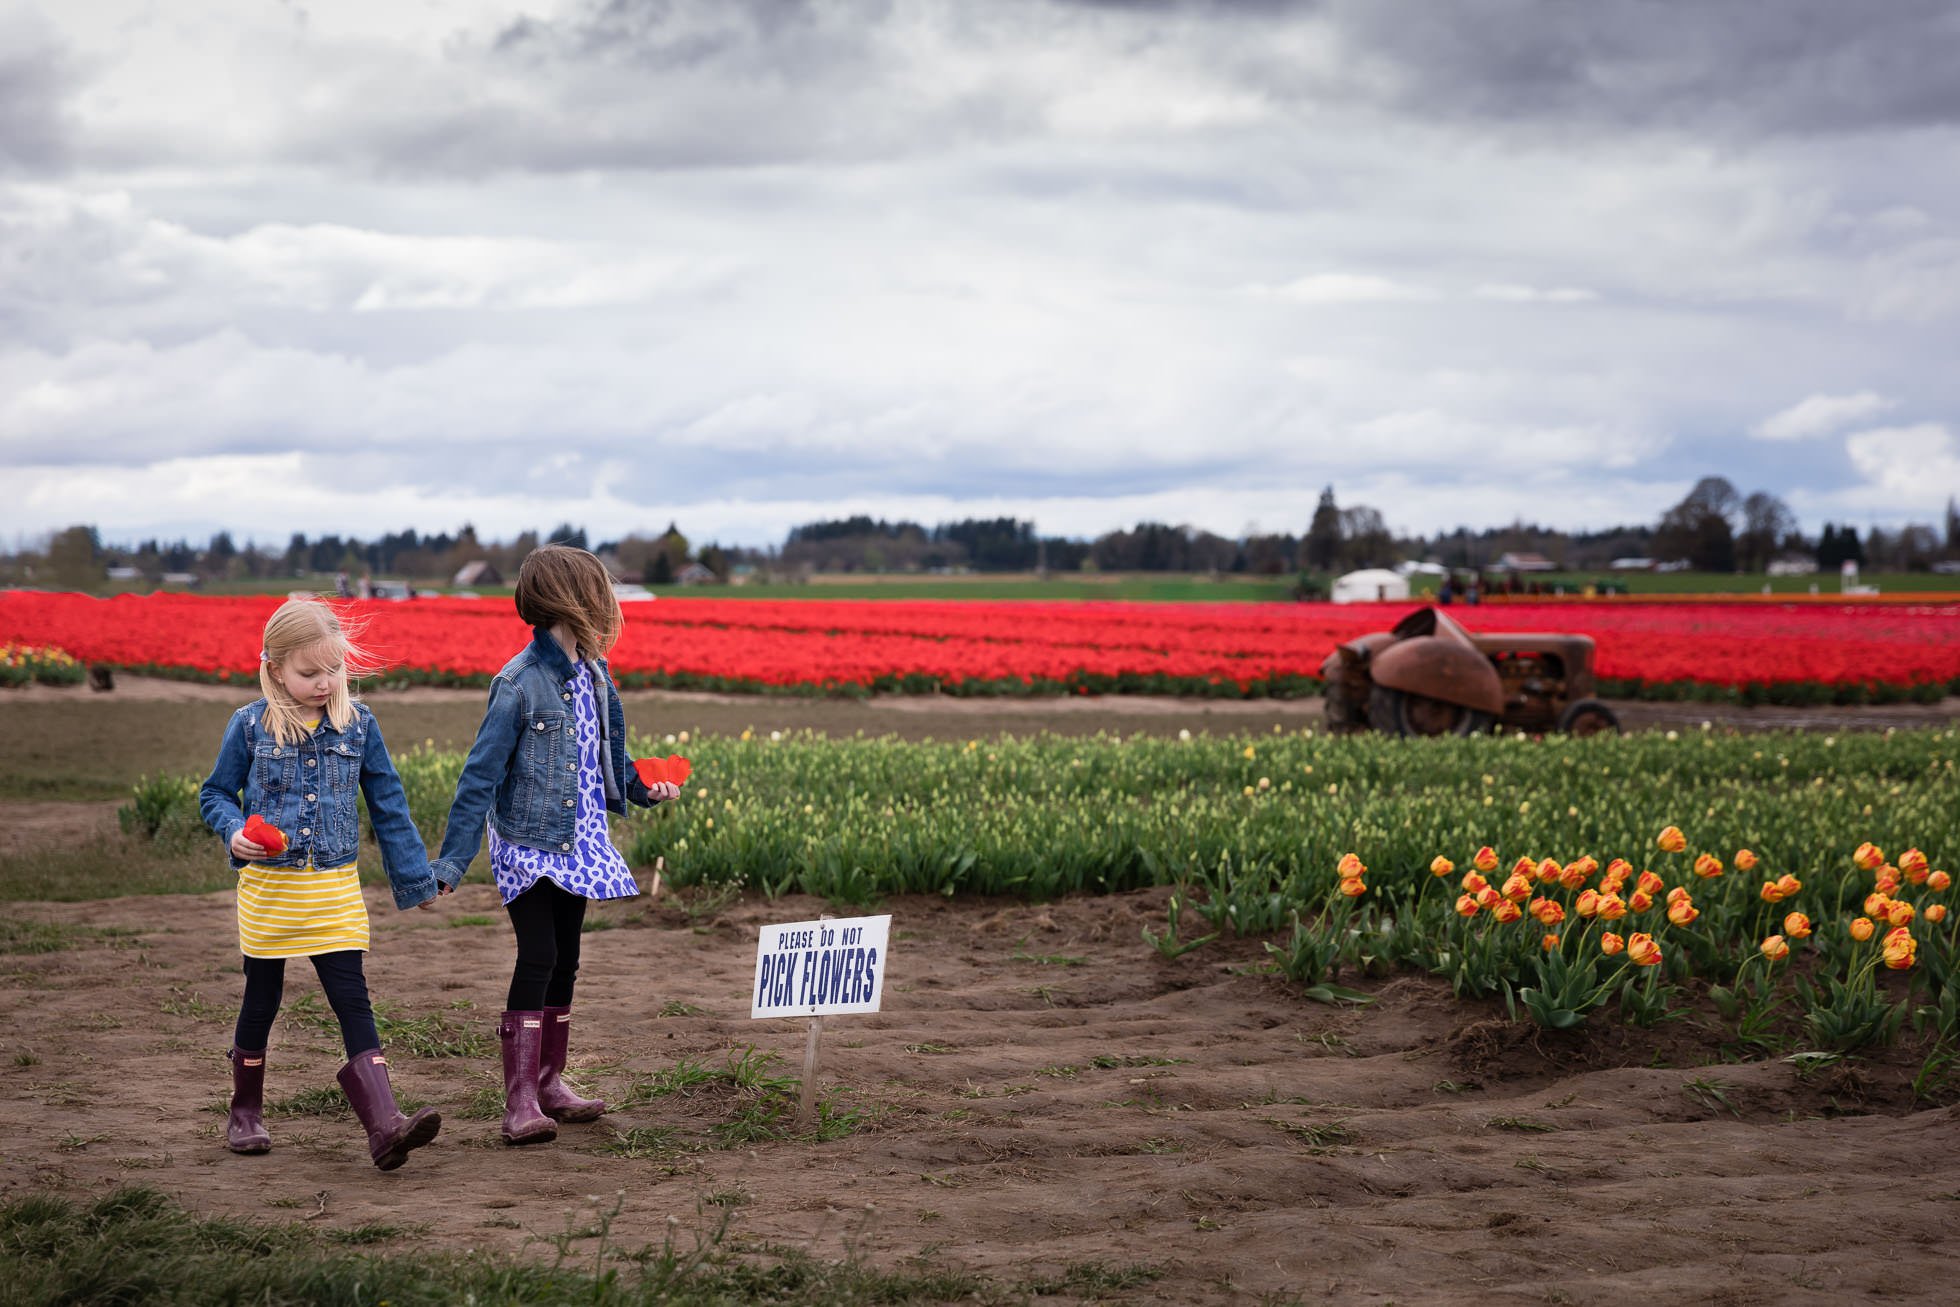 sisters walking at oregon tulip festival by do not pick flower sign holding tulip petals by rebecca hunnicutt farren portland oregon childrens photographer